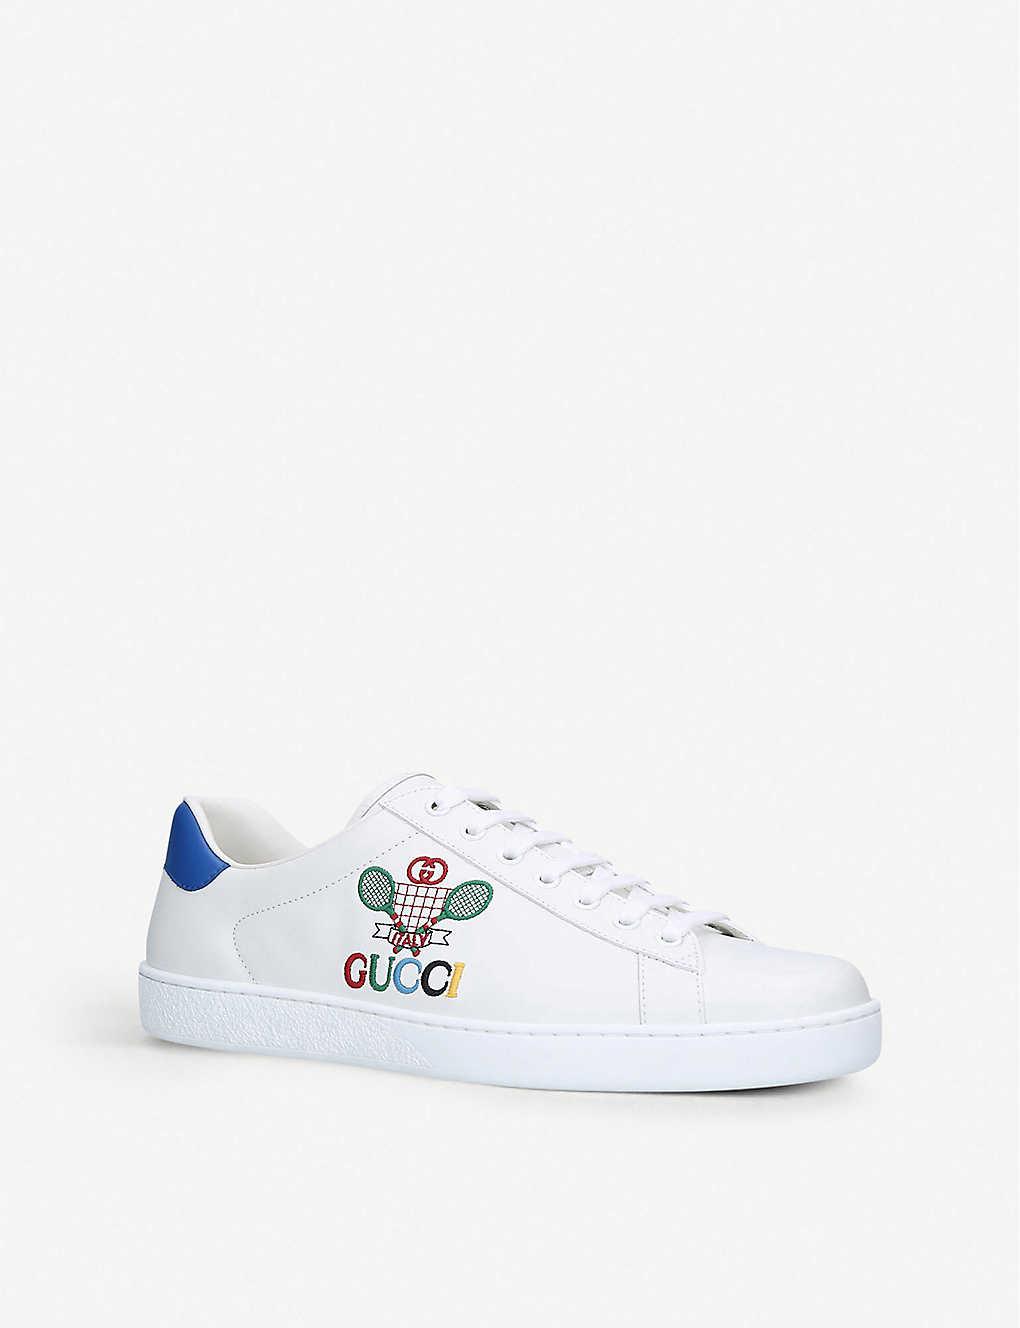 Gucci Ace White Tennis Embroidered Sneakers